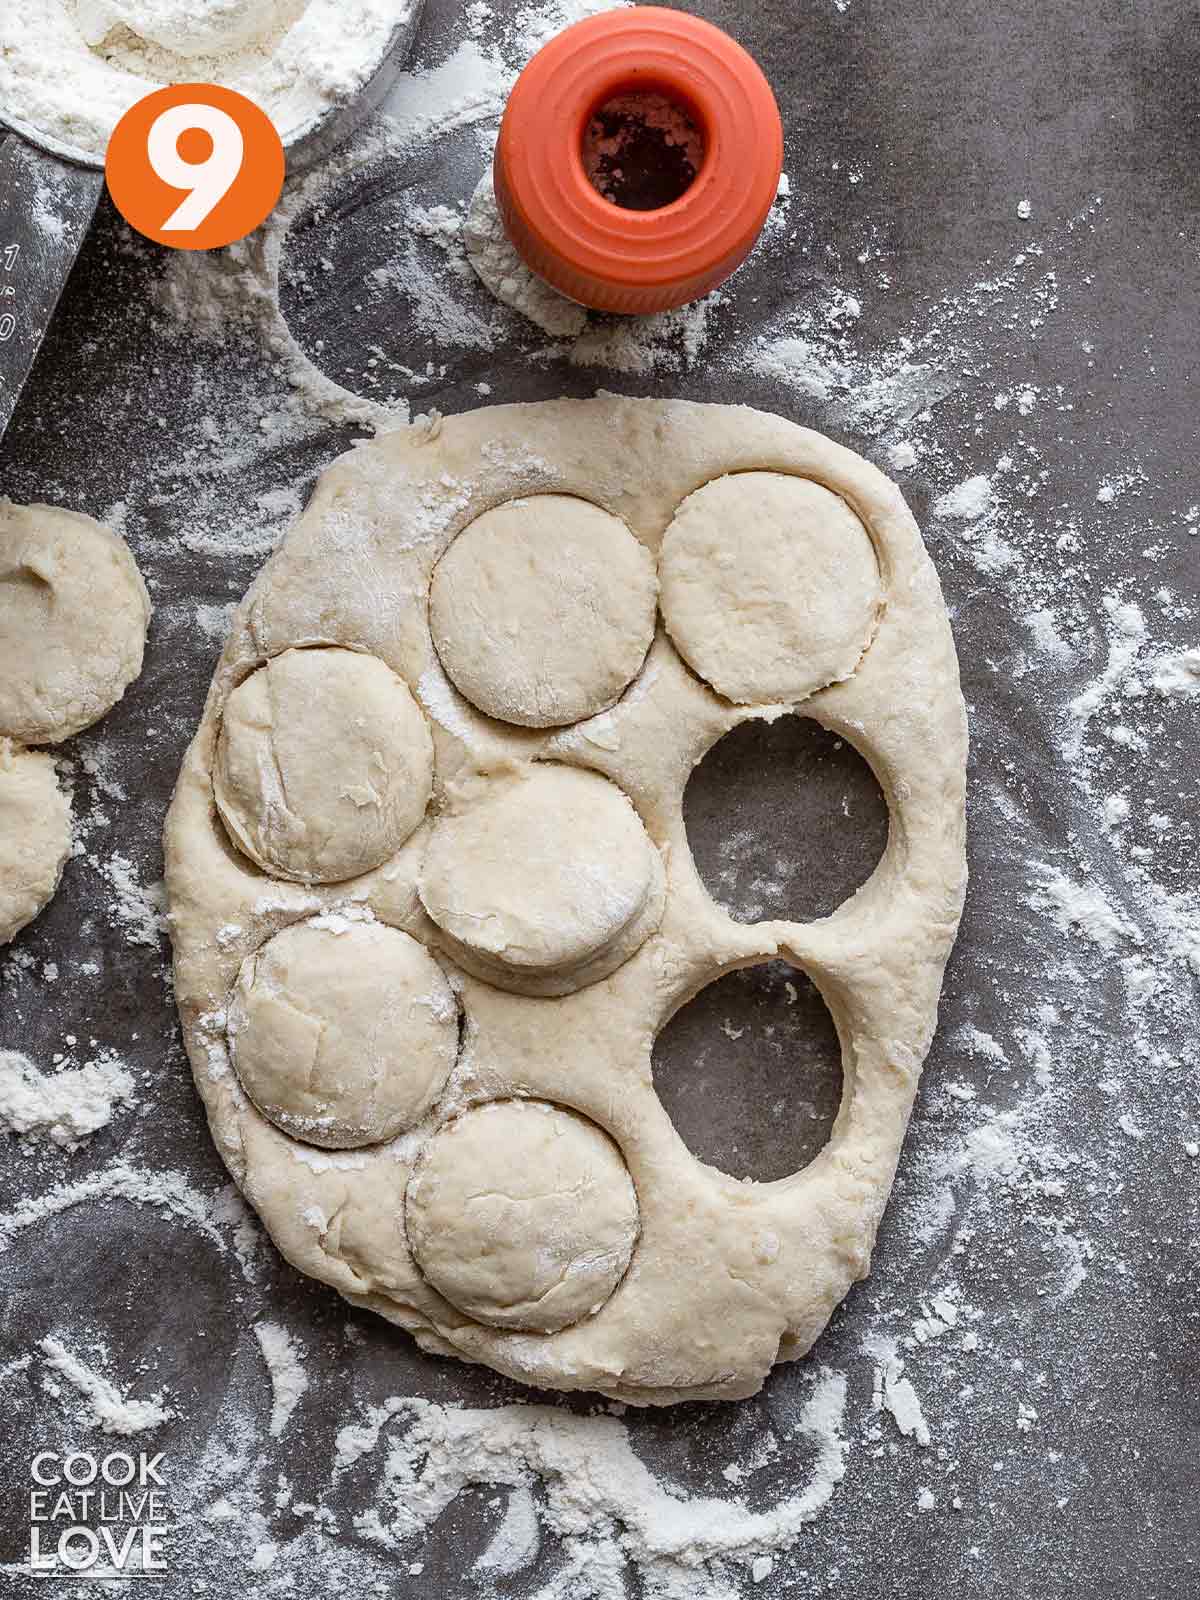 Dough rolled out on the work surface and cut with a biscuit cutter.